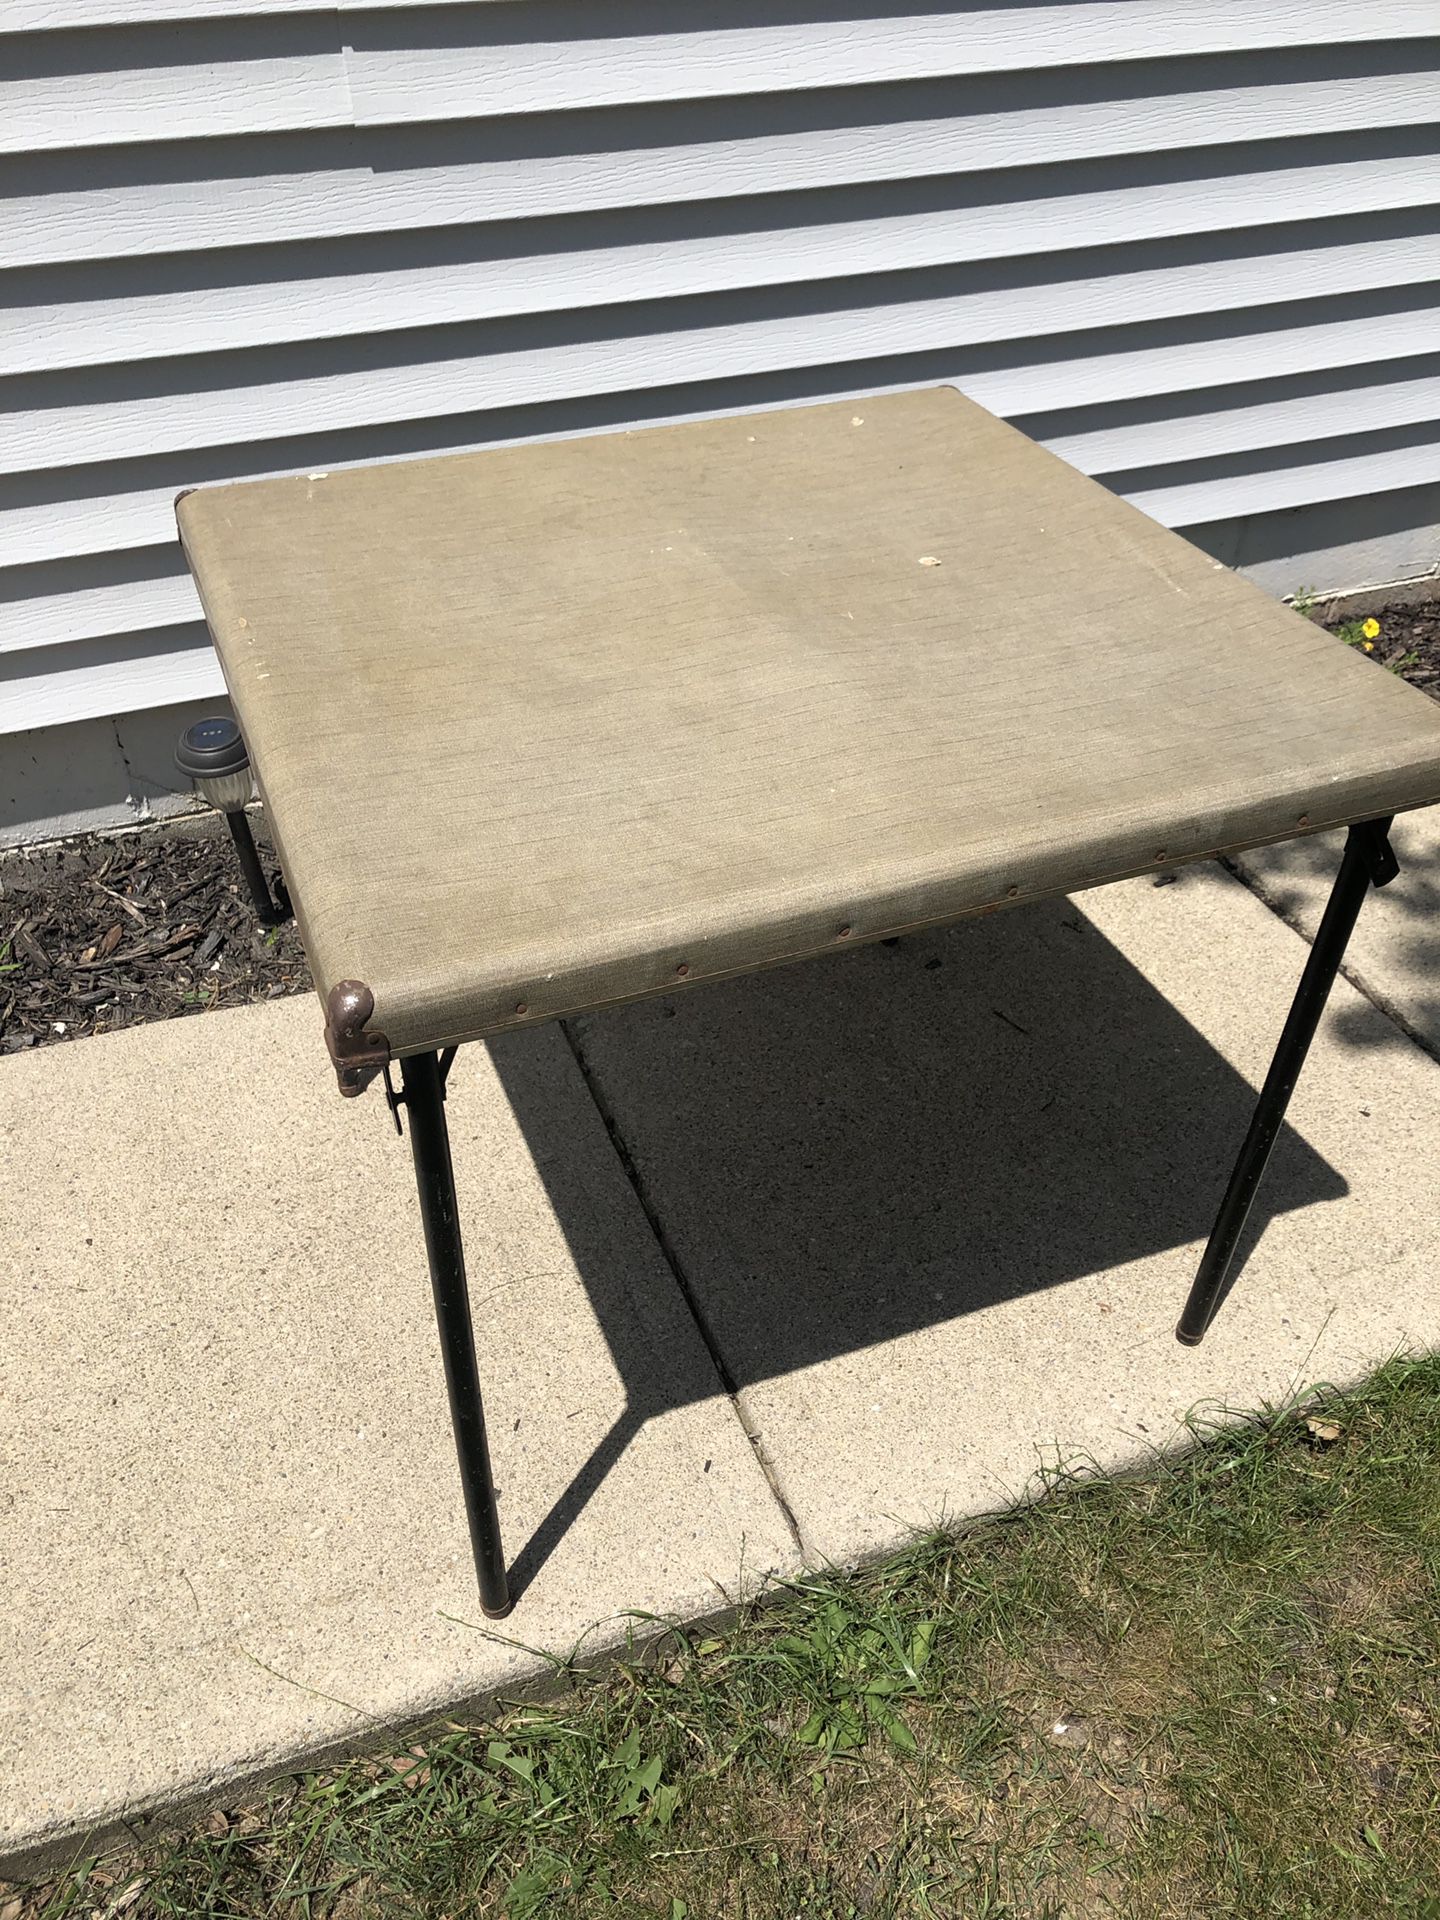 Small card table